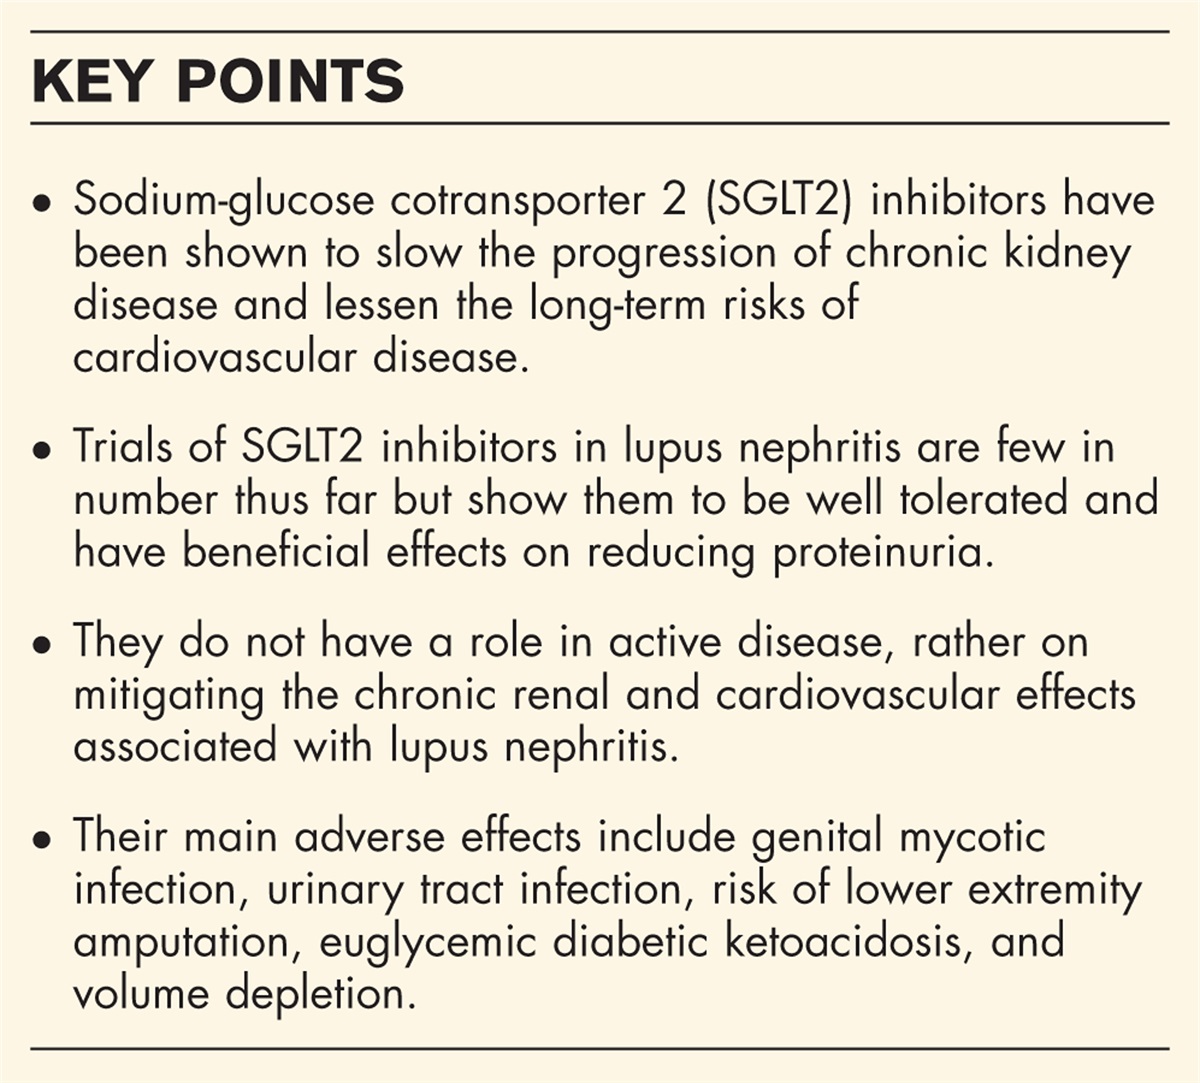 Sodium-glucose cotransporter 2 inhibitors: are they ready for prime time in the management of lupus nephritis?